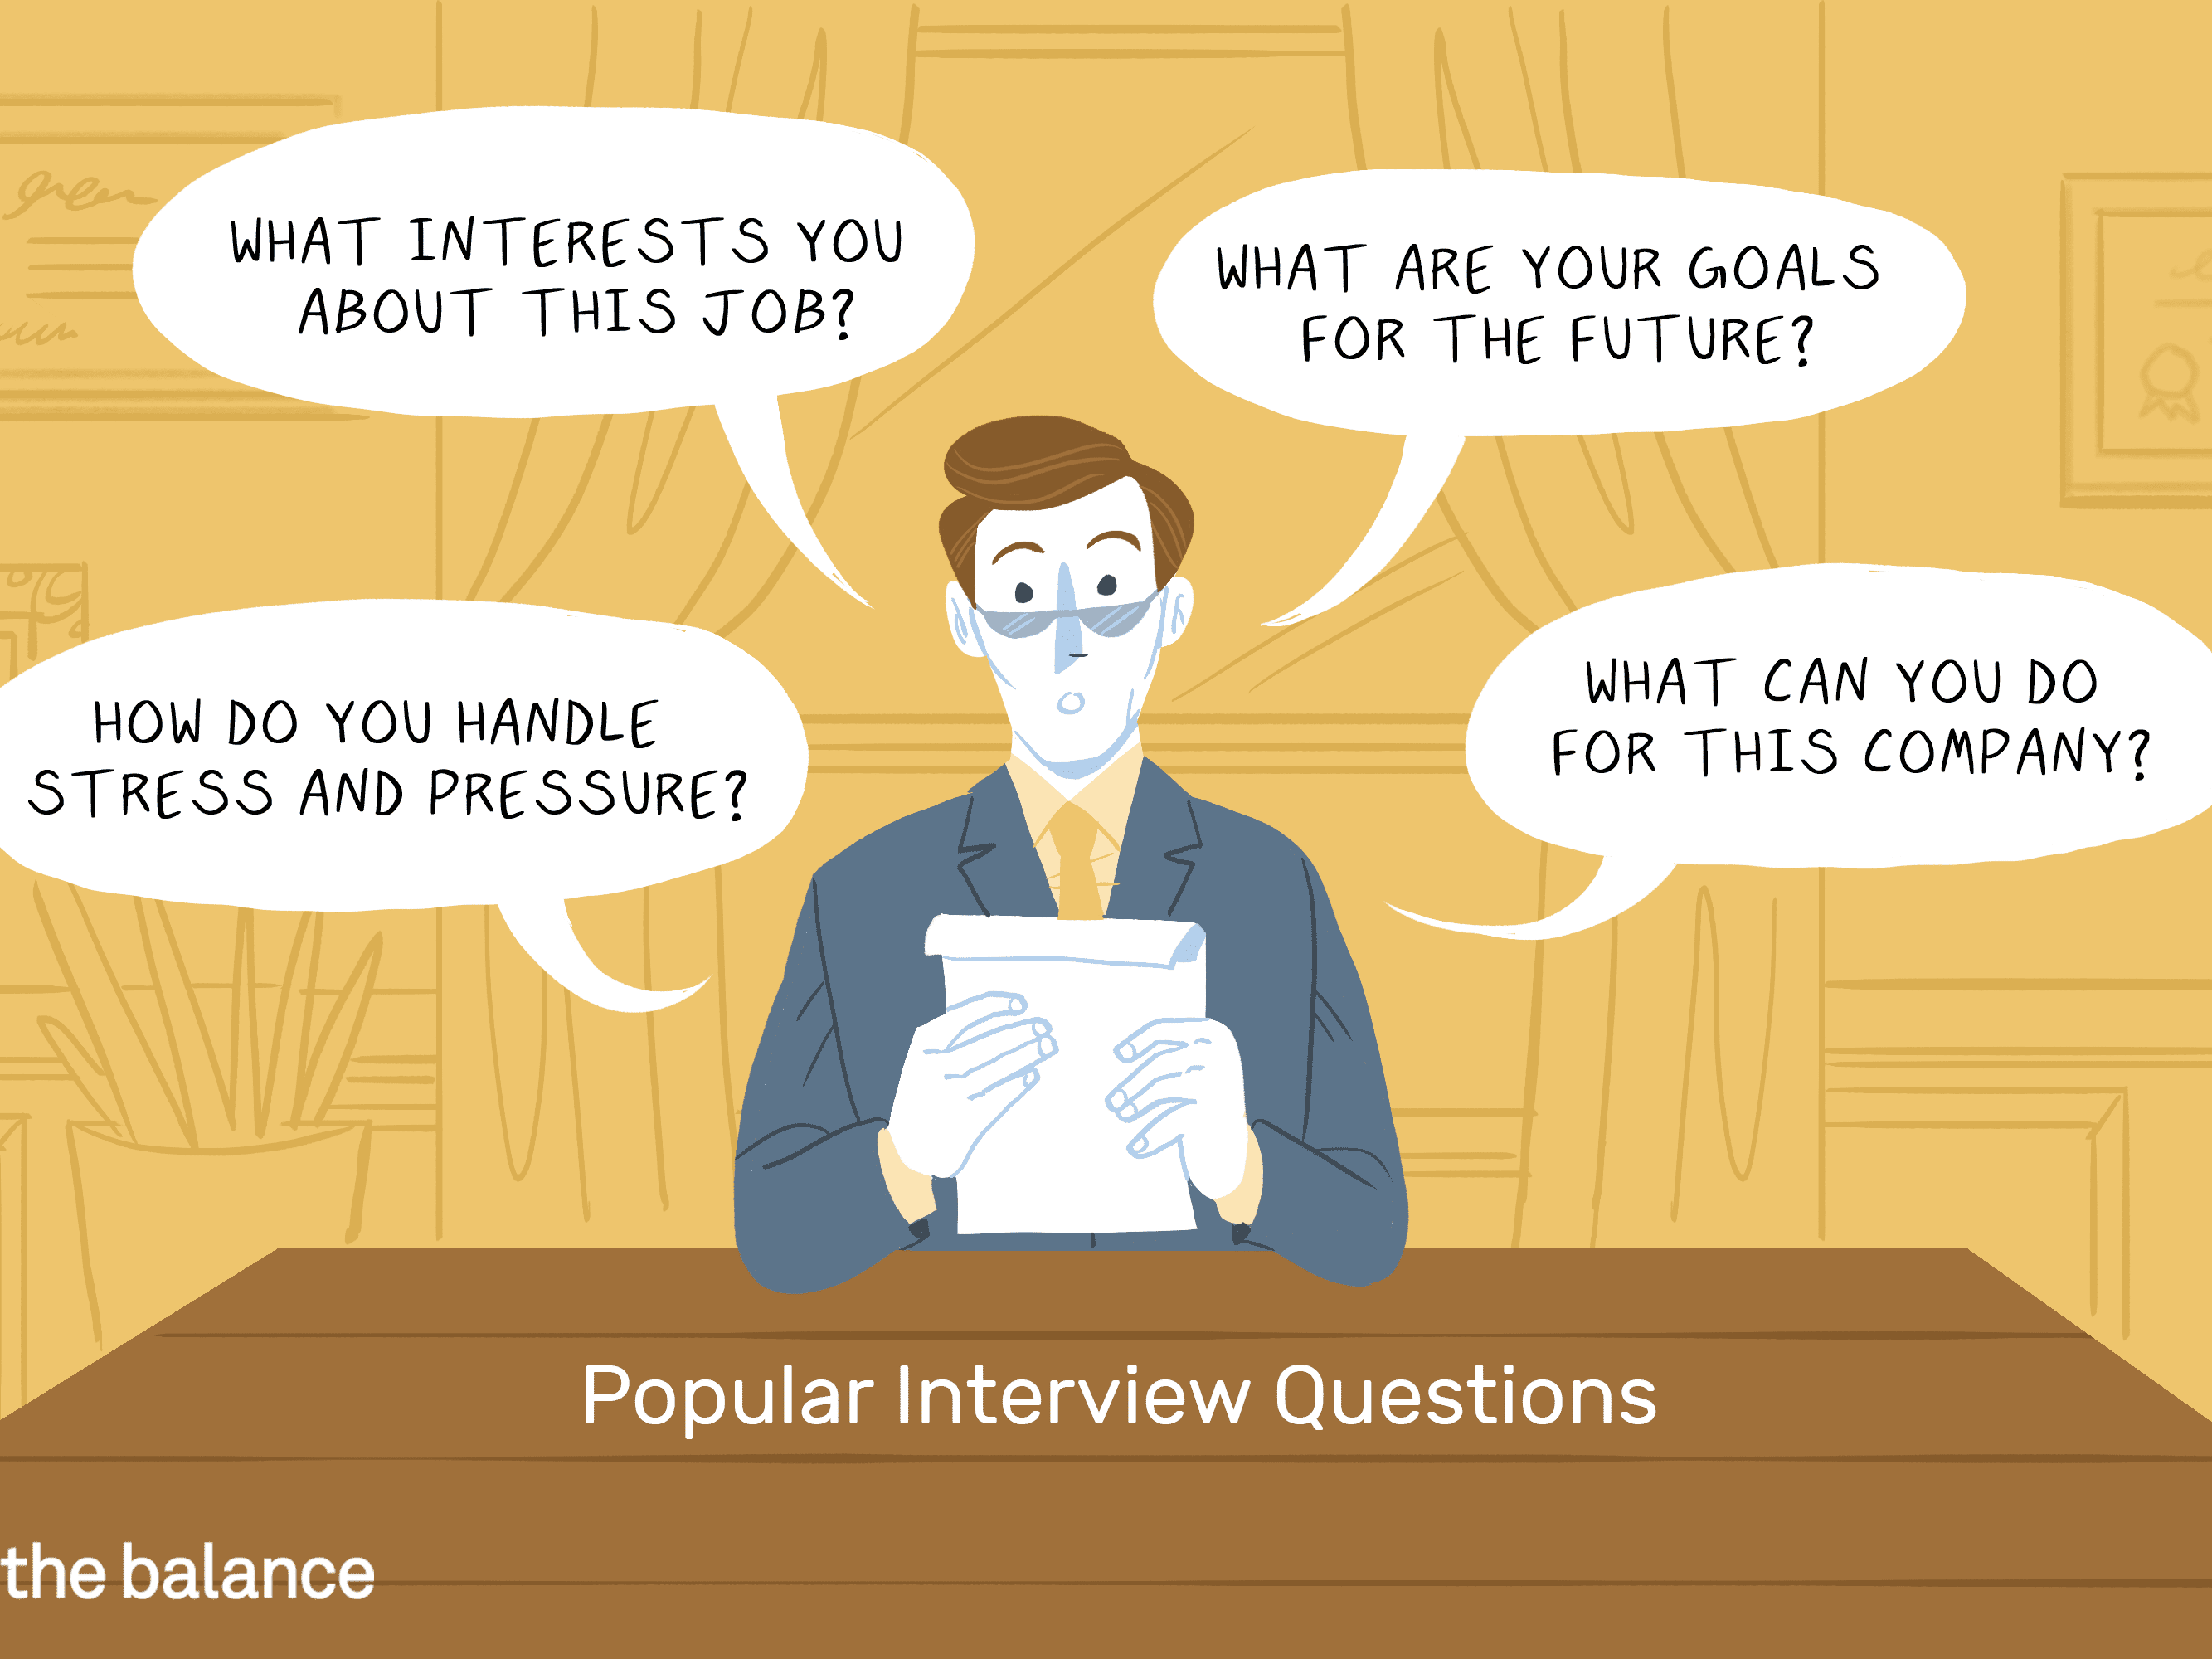 Common Screening Questions Asked at Job Interviews - Study N Career